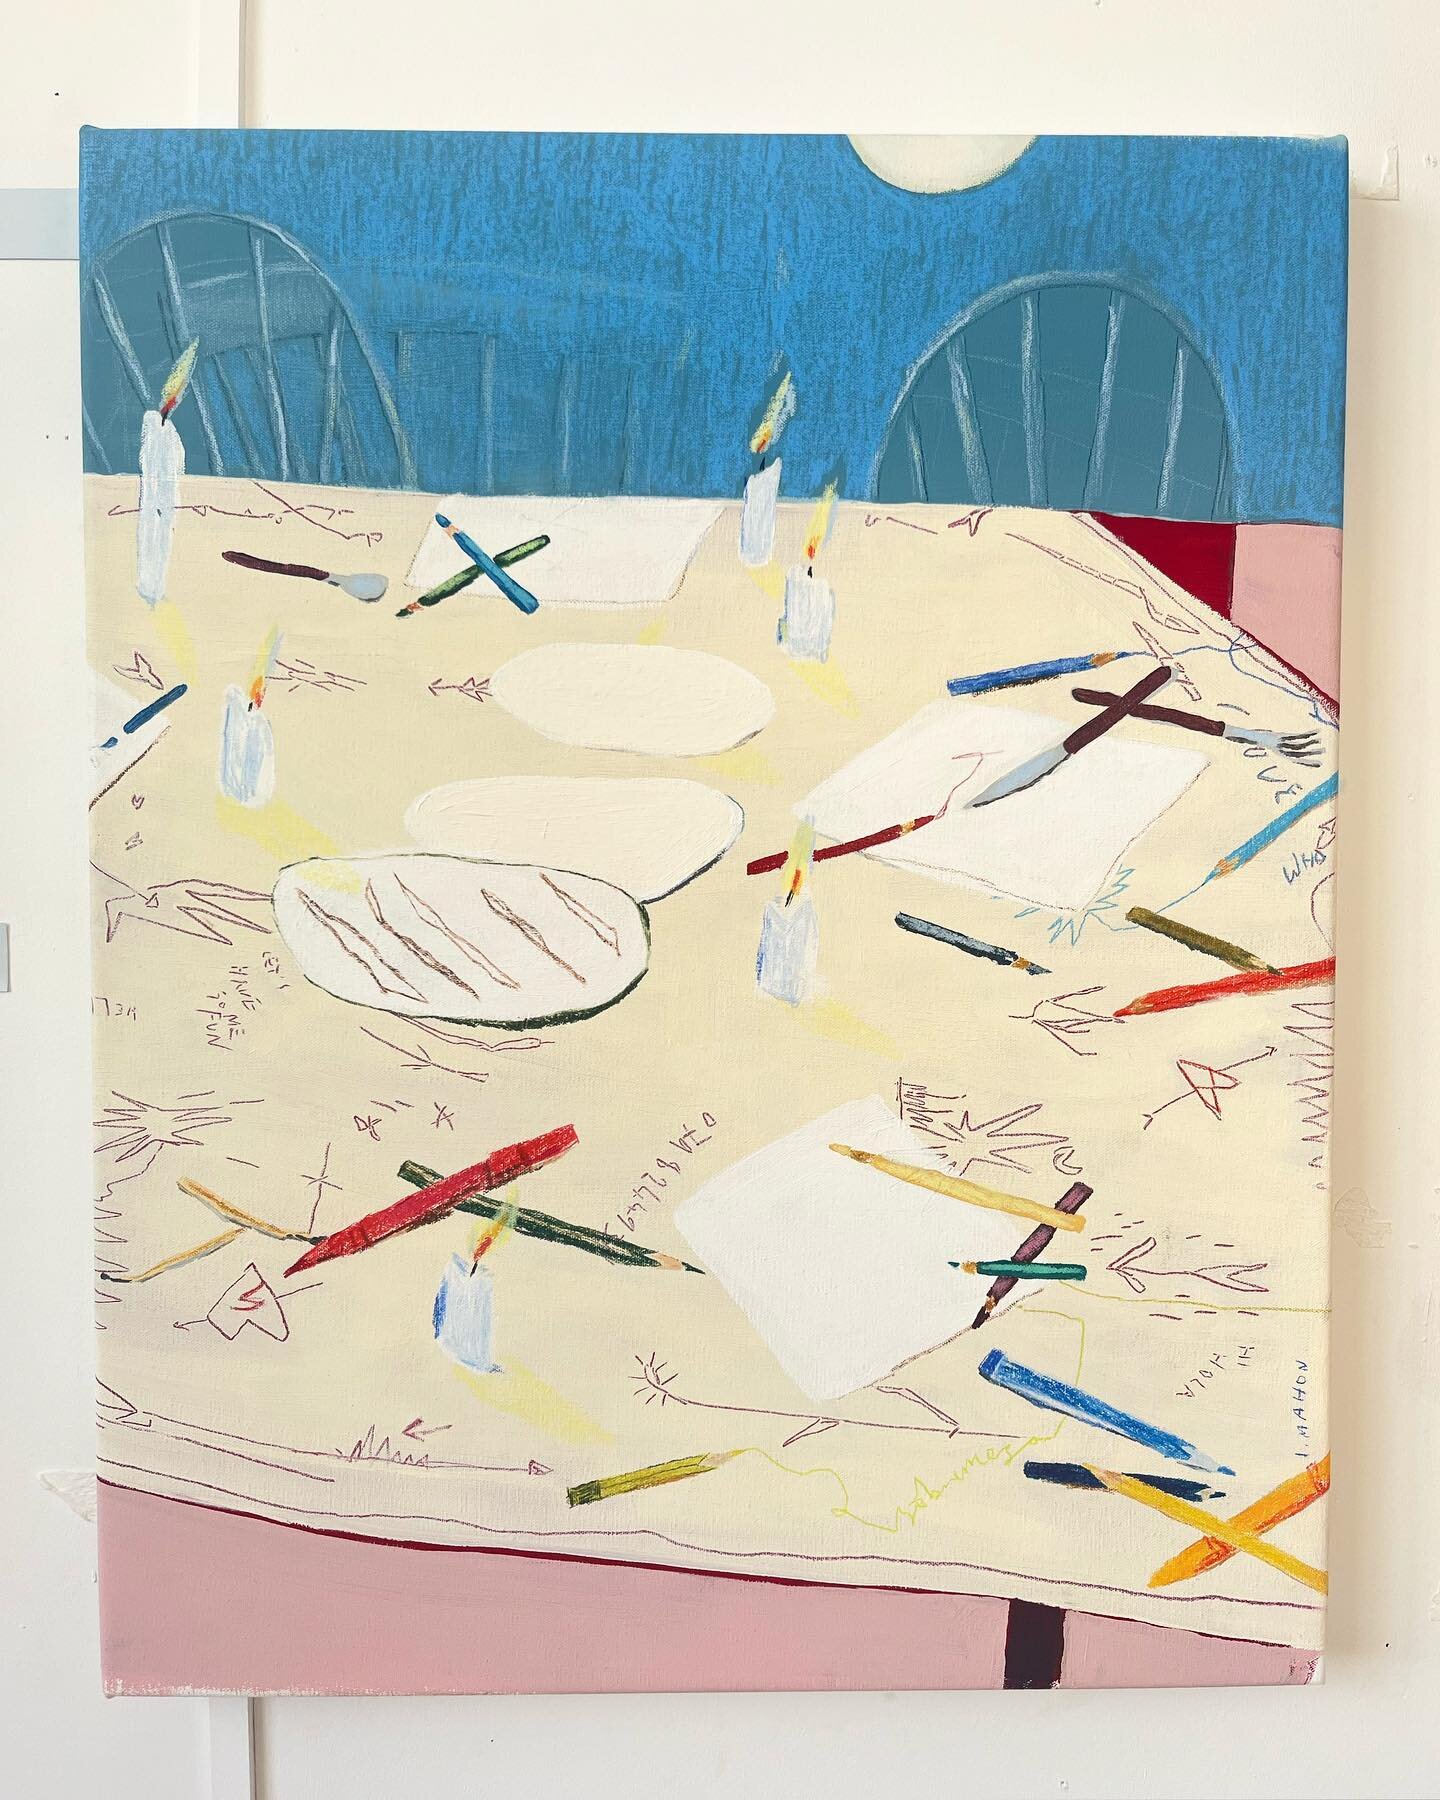 Crayons at the dinner table

Acrylic, wax crayon and pencil on canvas
60x75cm
Painted on residency @casa.balandra